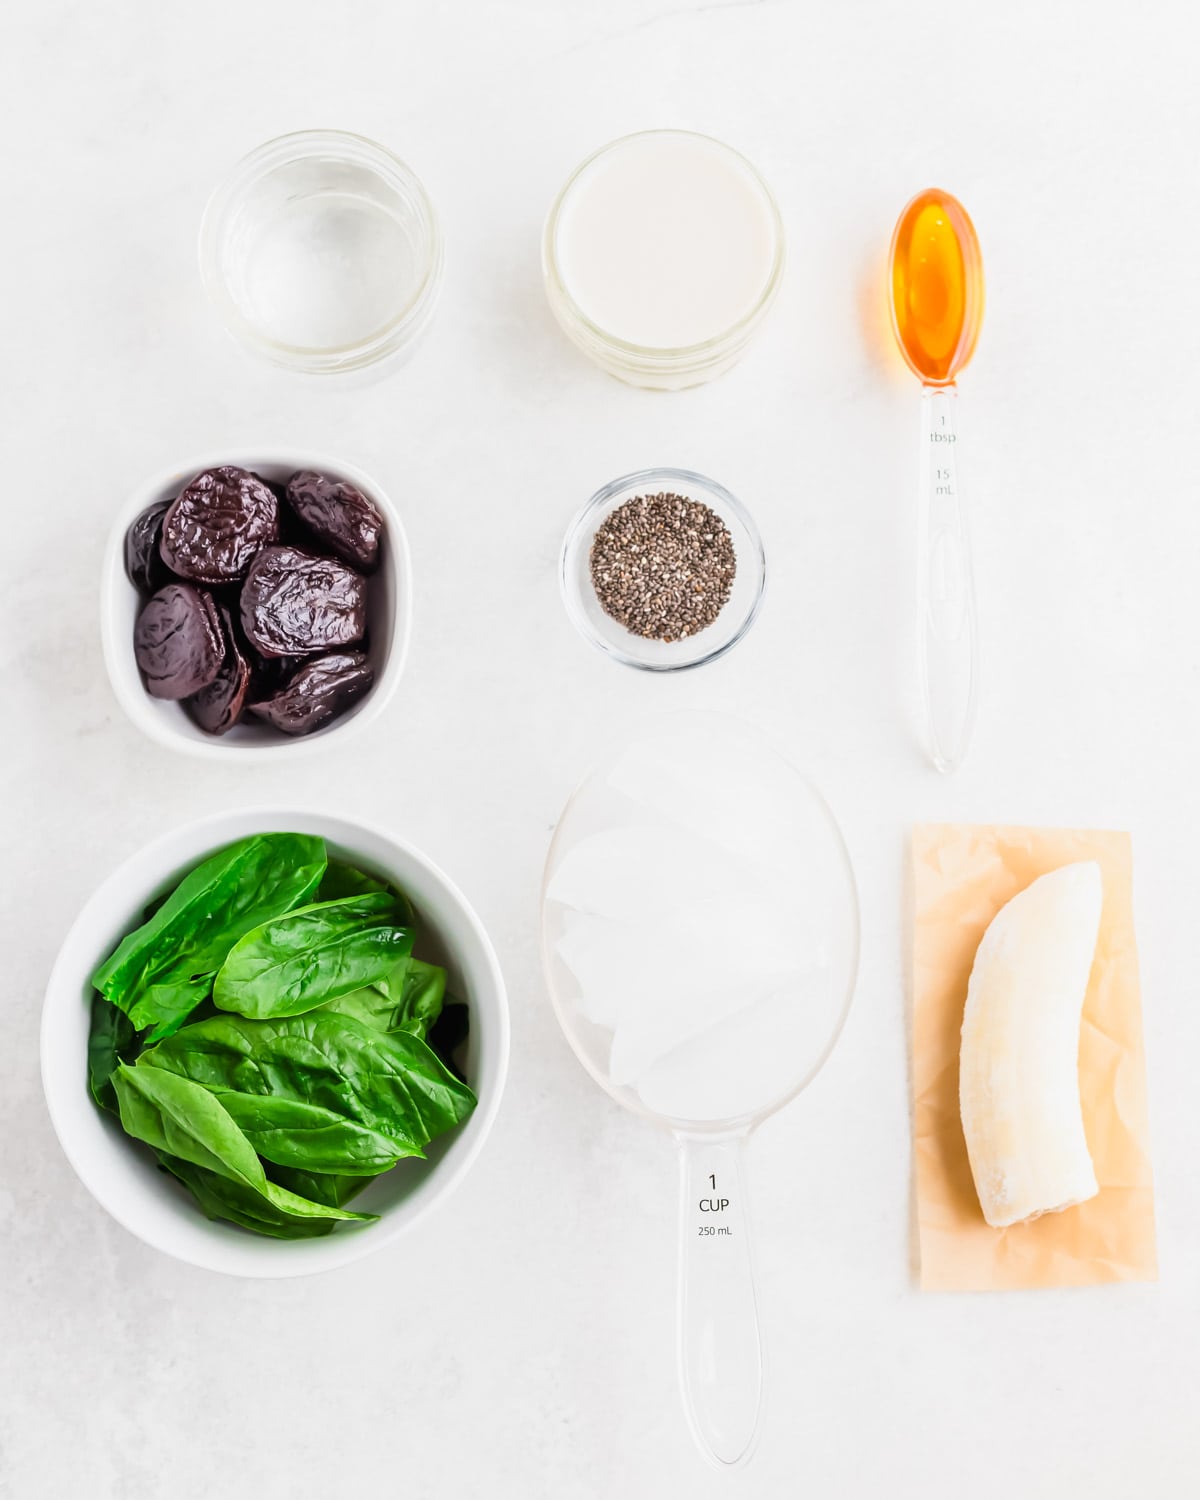 Ingredients to make a green prune smoothie on a white surface.